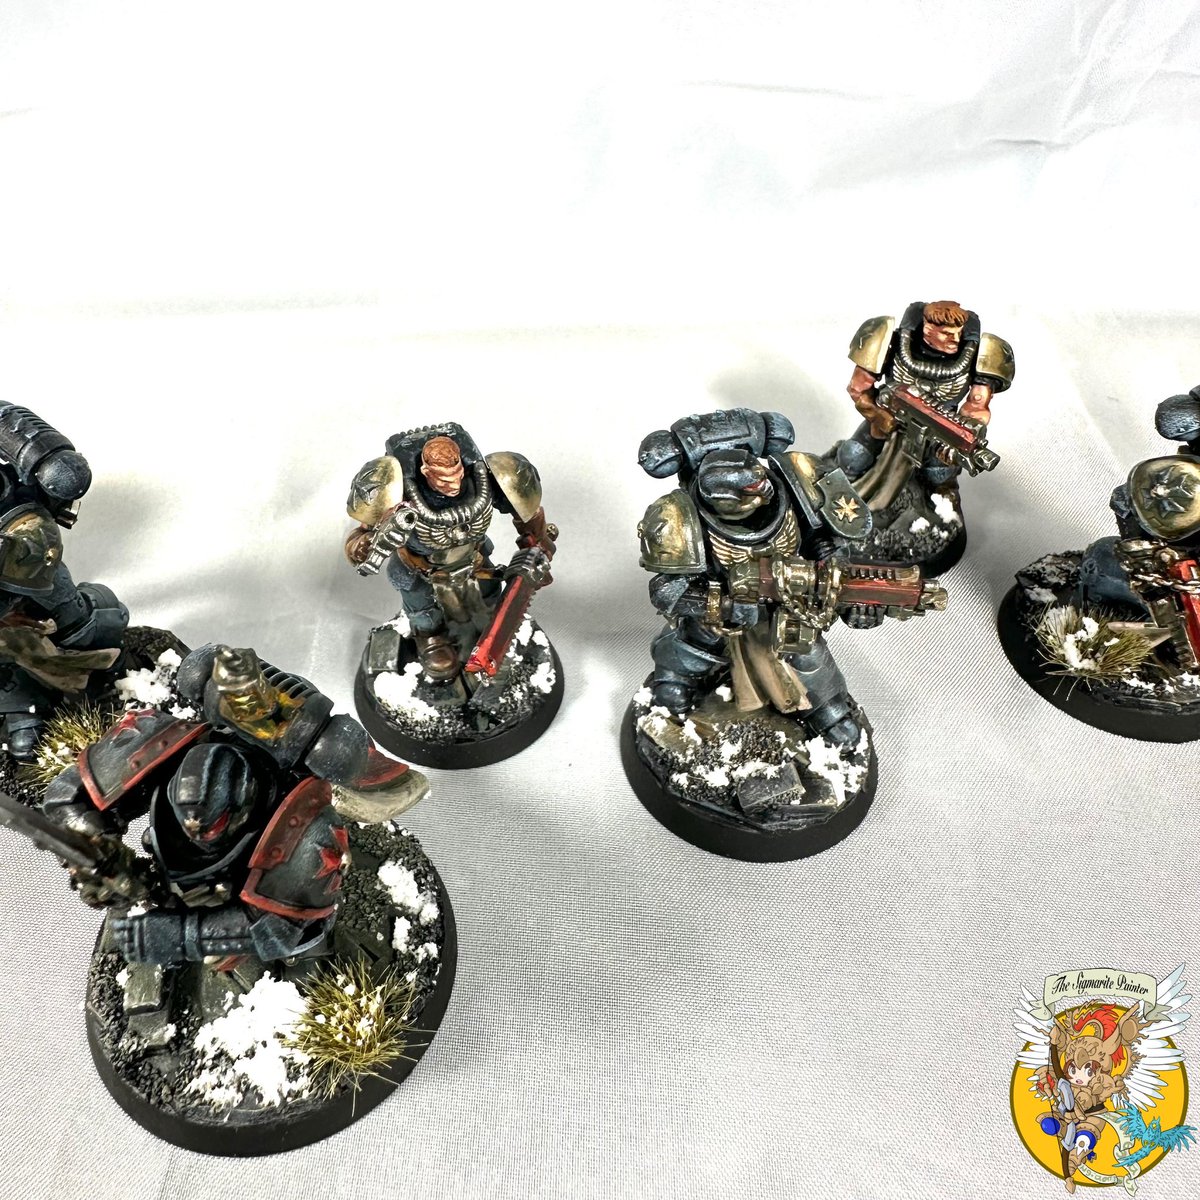 Here are an few group pictures of #PrimarisCrusaderSquad Nr.2 for the #SpaceMarines of the #BlackTemplars in #Warhammer40K.

#WarhammerCommunity #PaintingWarhammer #PaintingWarhammer40K #Theeternalcrusade #leviathan